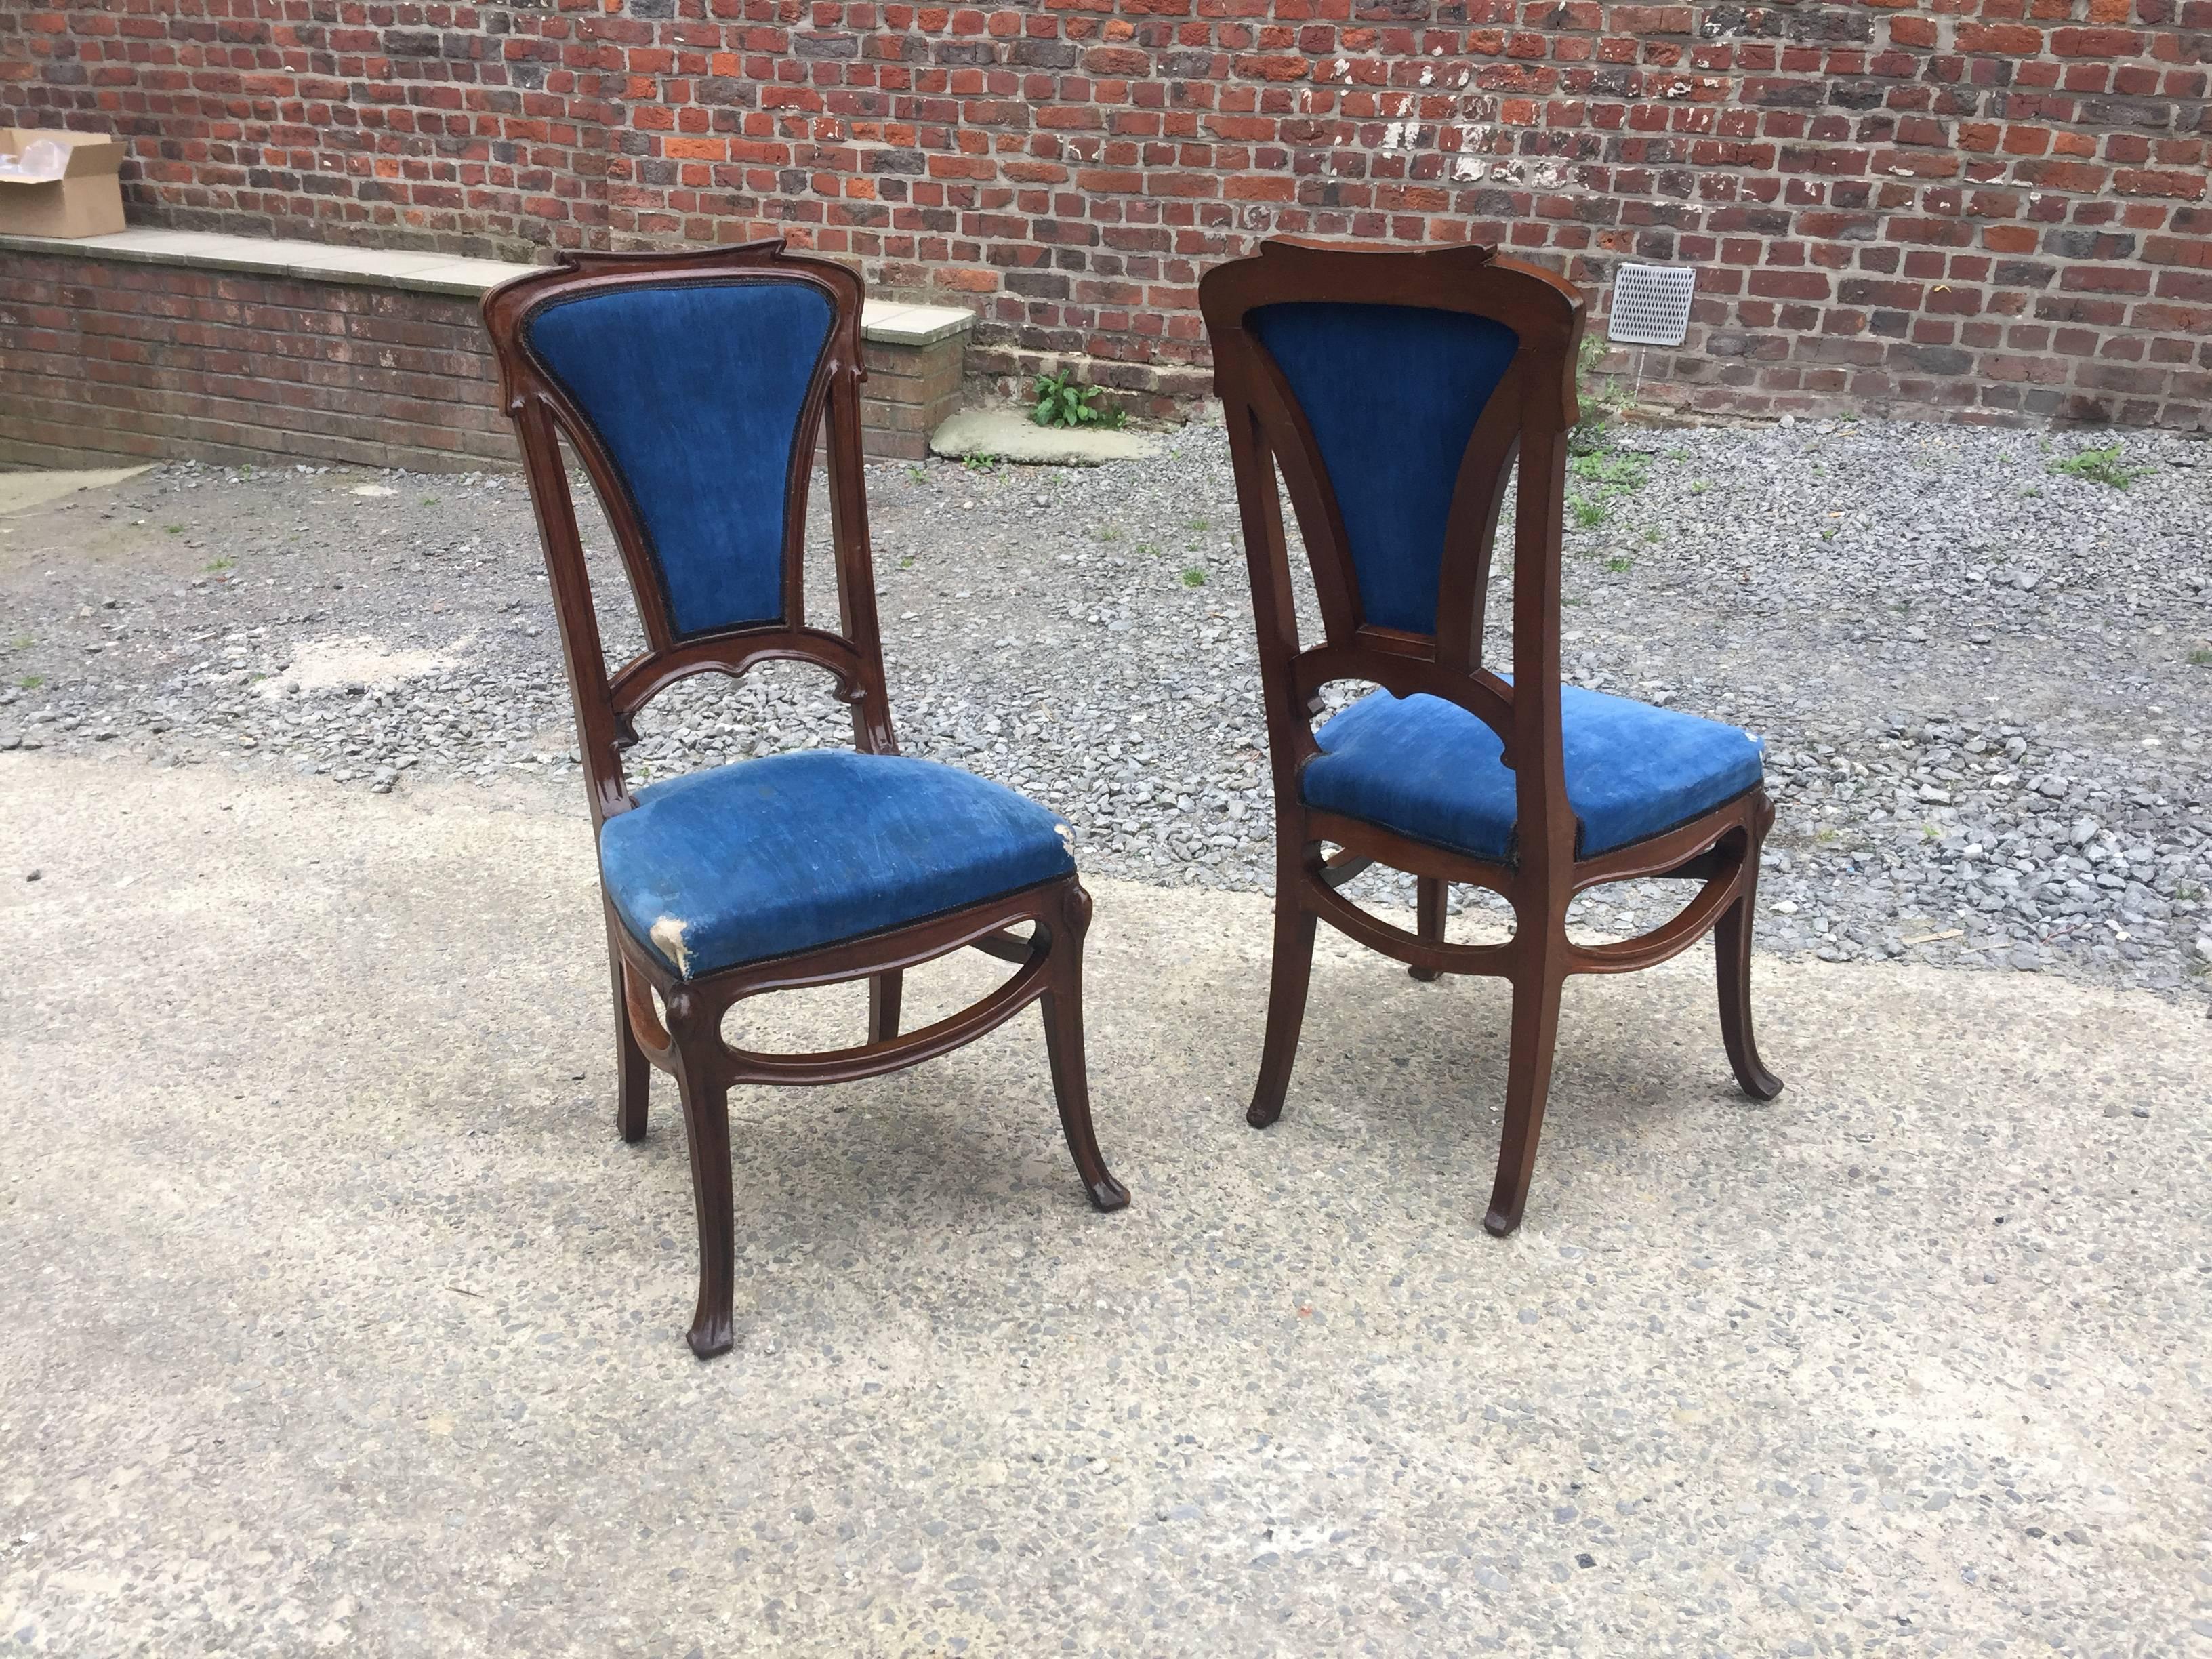 Pair of Art Nouveau chairs in mahogany, circa 1900.
 